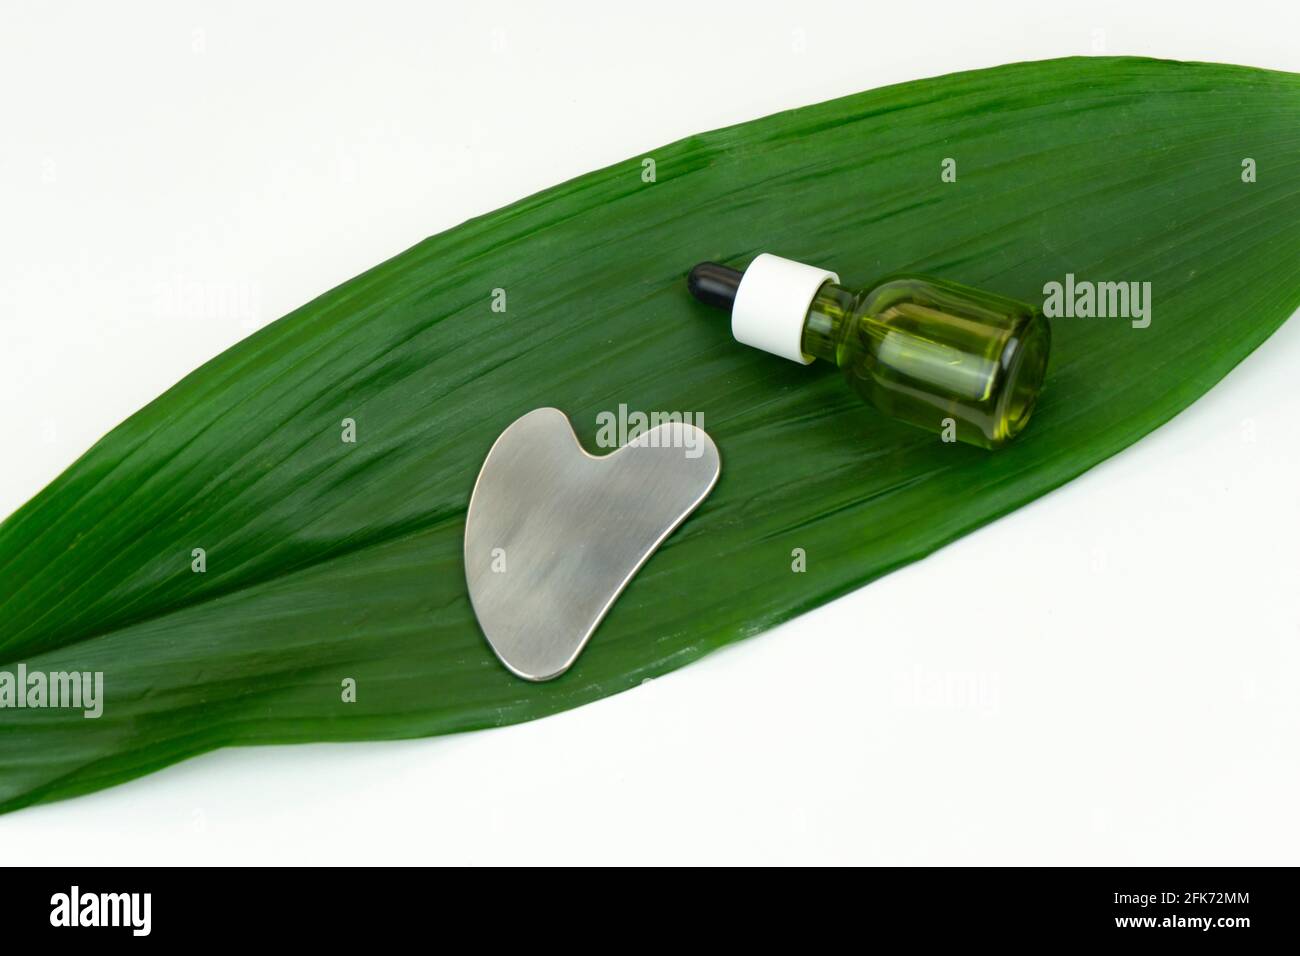 An unbranded green CBD cannabis oil with a Gua sha massaging scraping tool lie on a green leaf Stock Photo